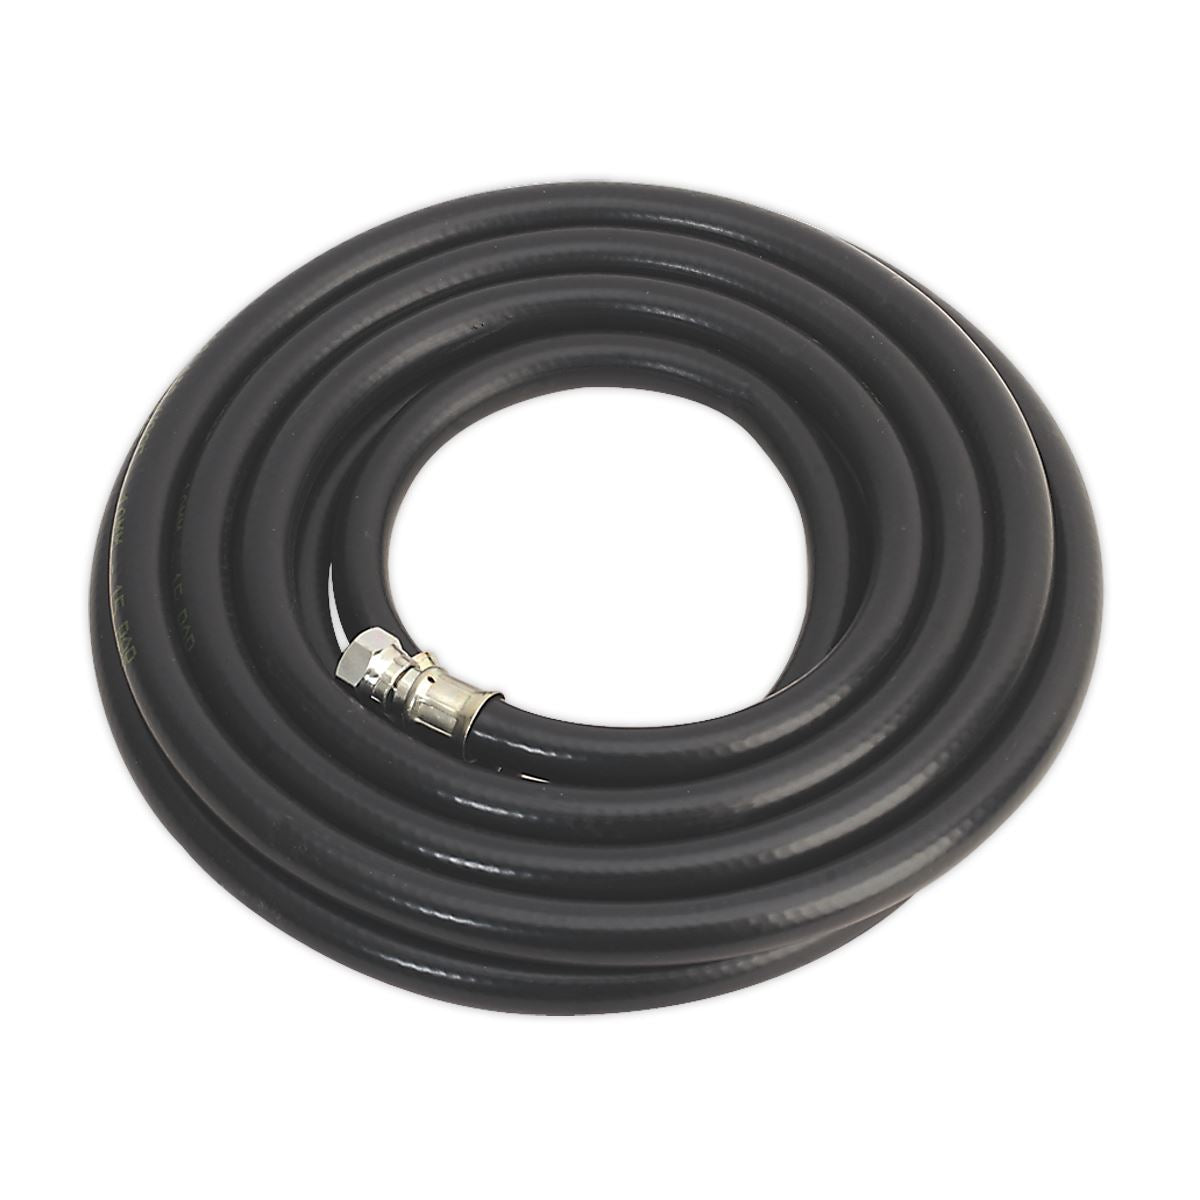 Sealey Air Hose 5m x Ø10mm with 1/4"BSP Unions Heavy-Duty